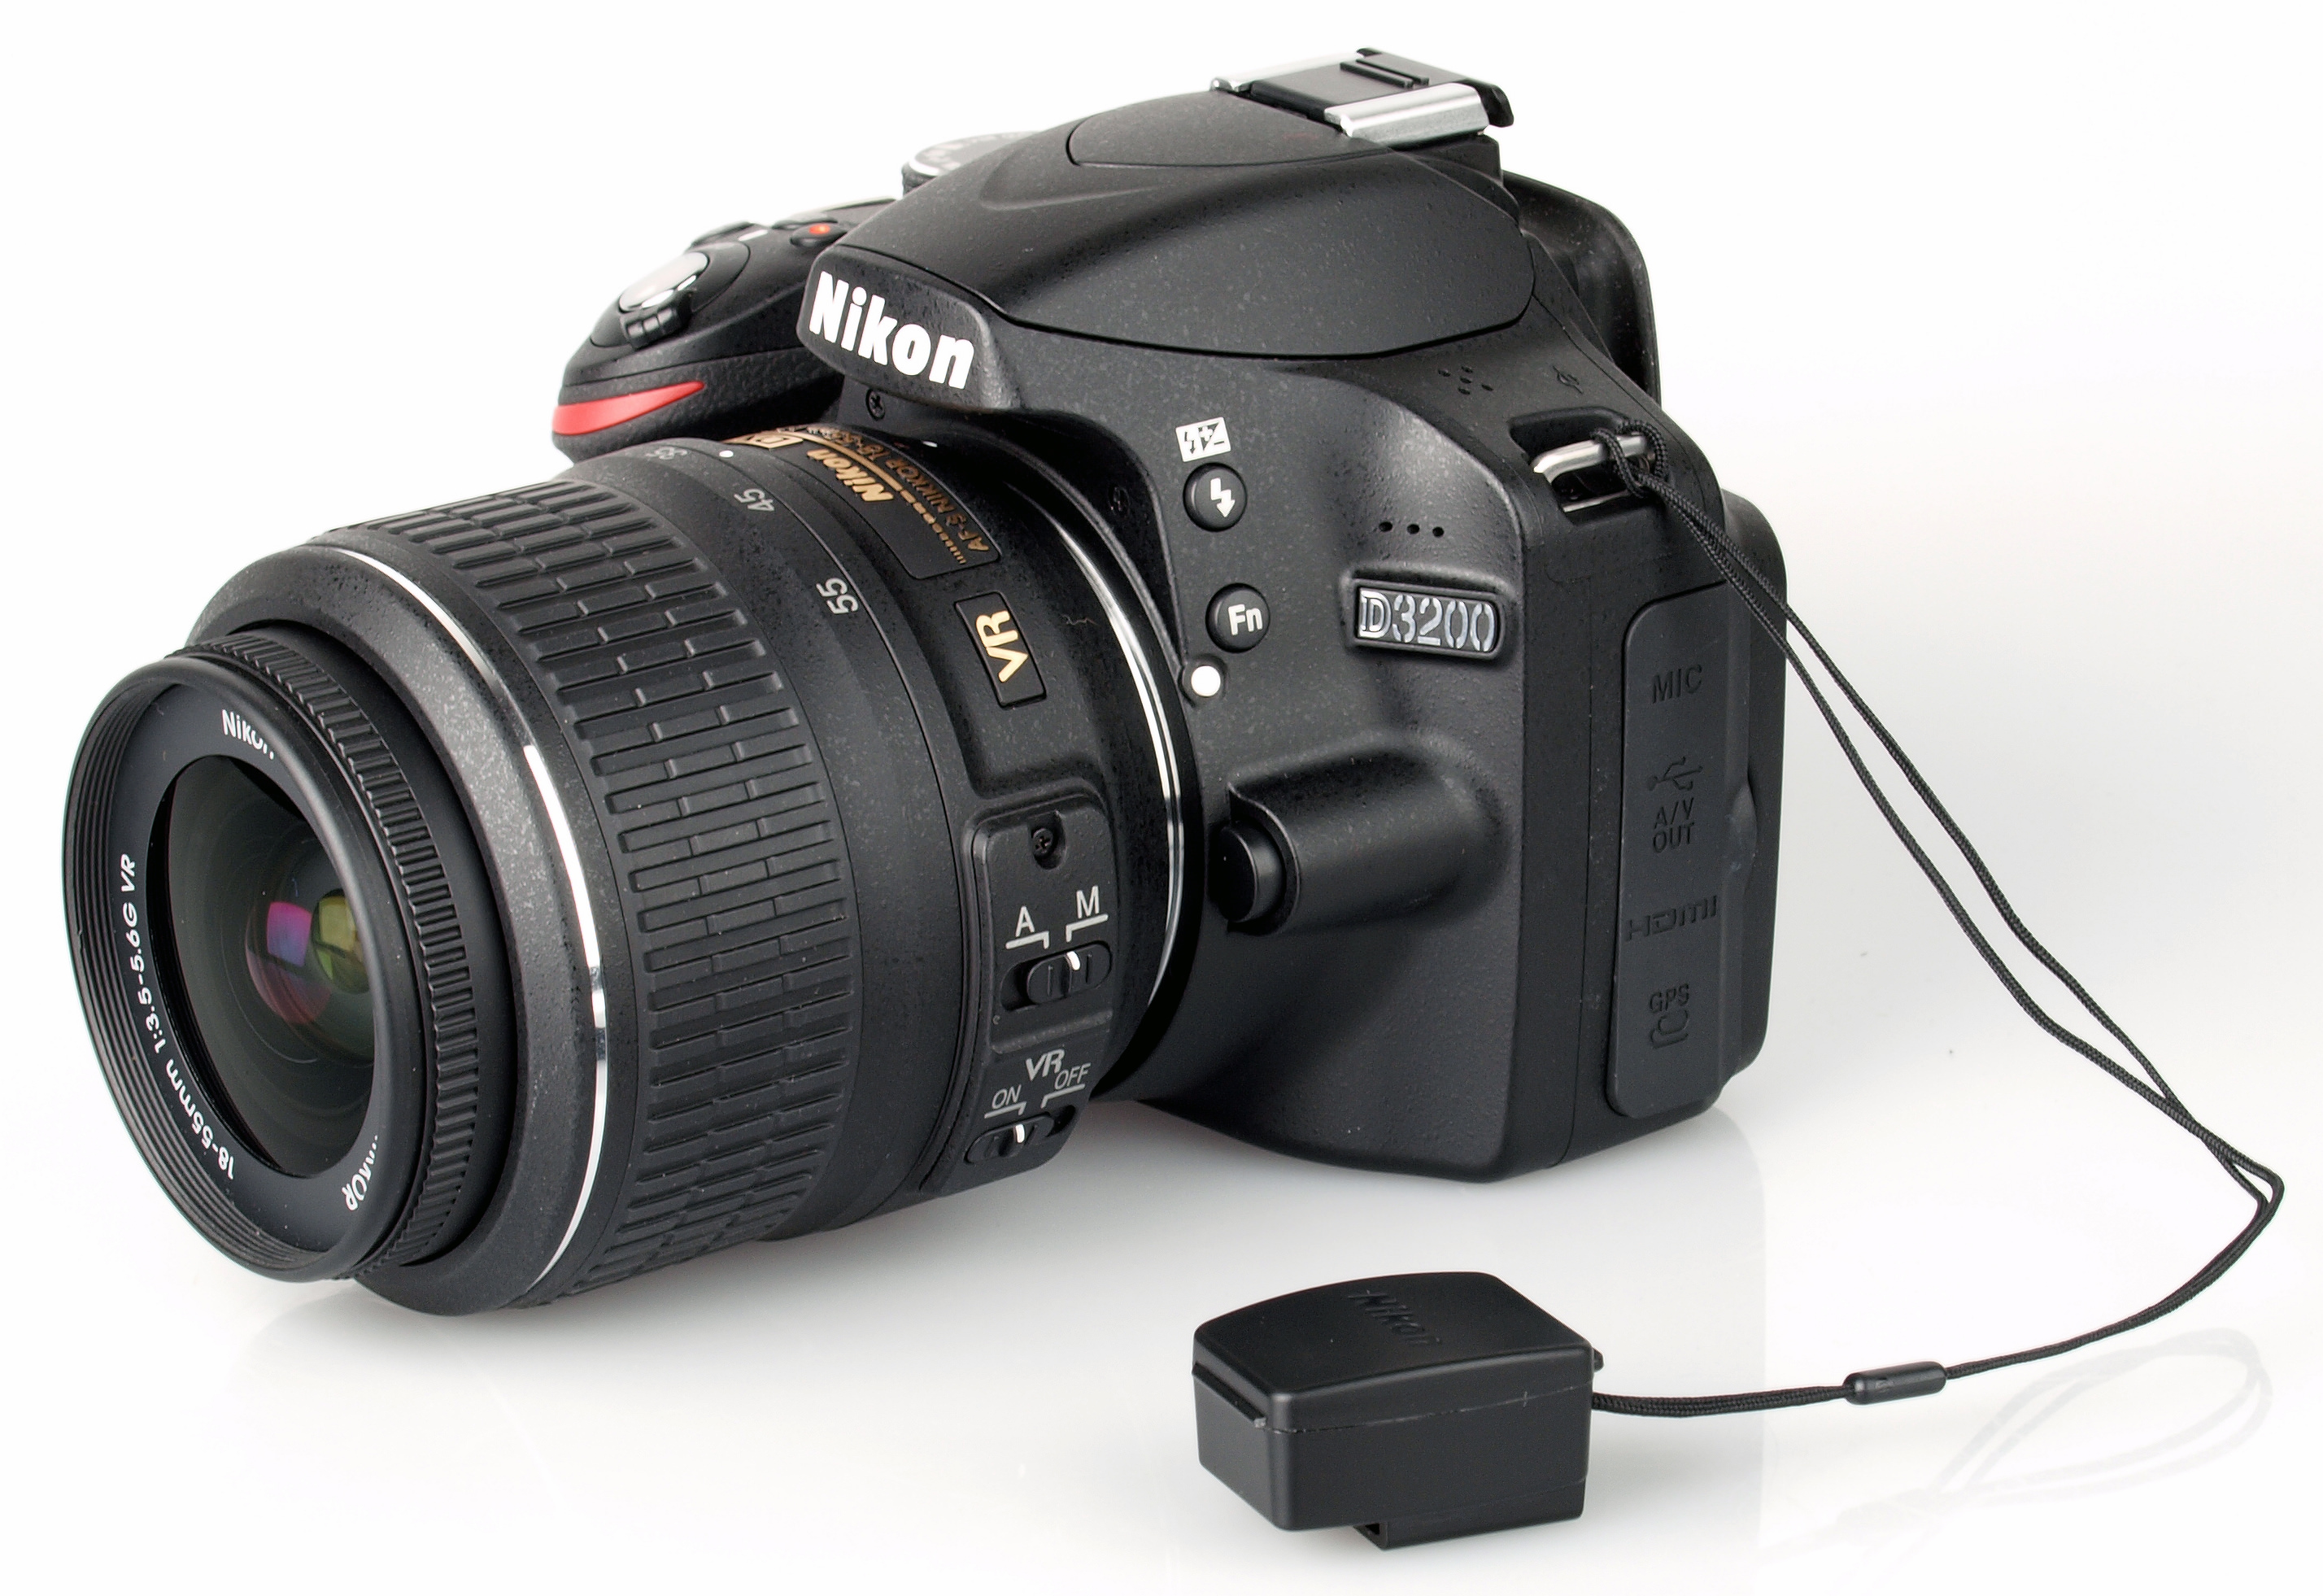 Nikon D3200 Download Pictures To Mac